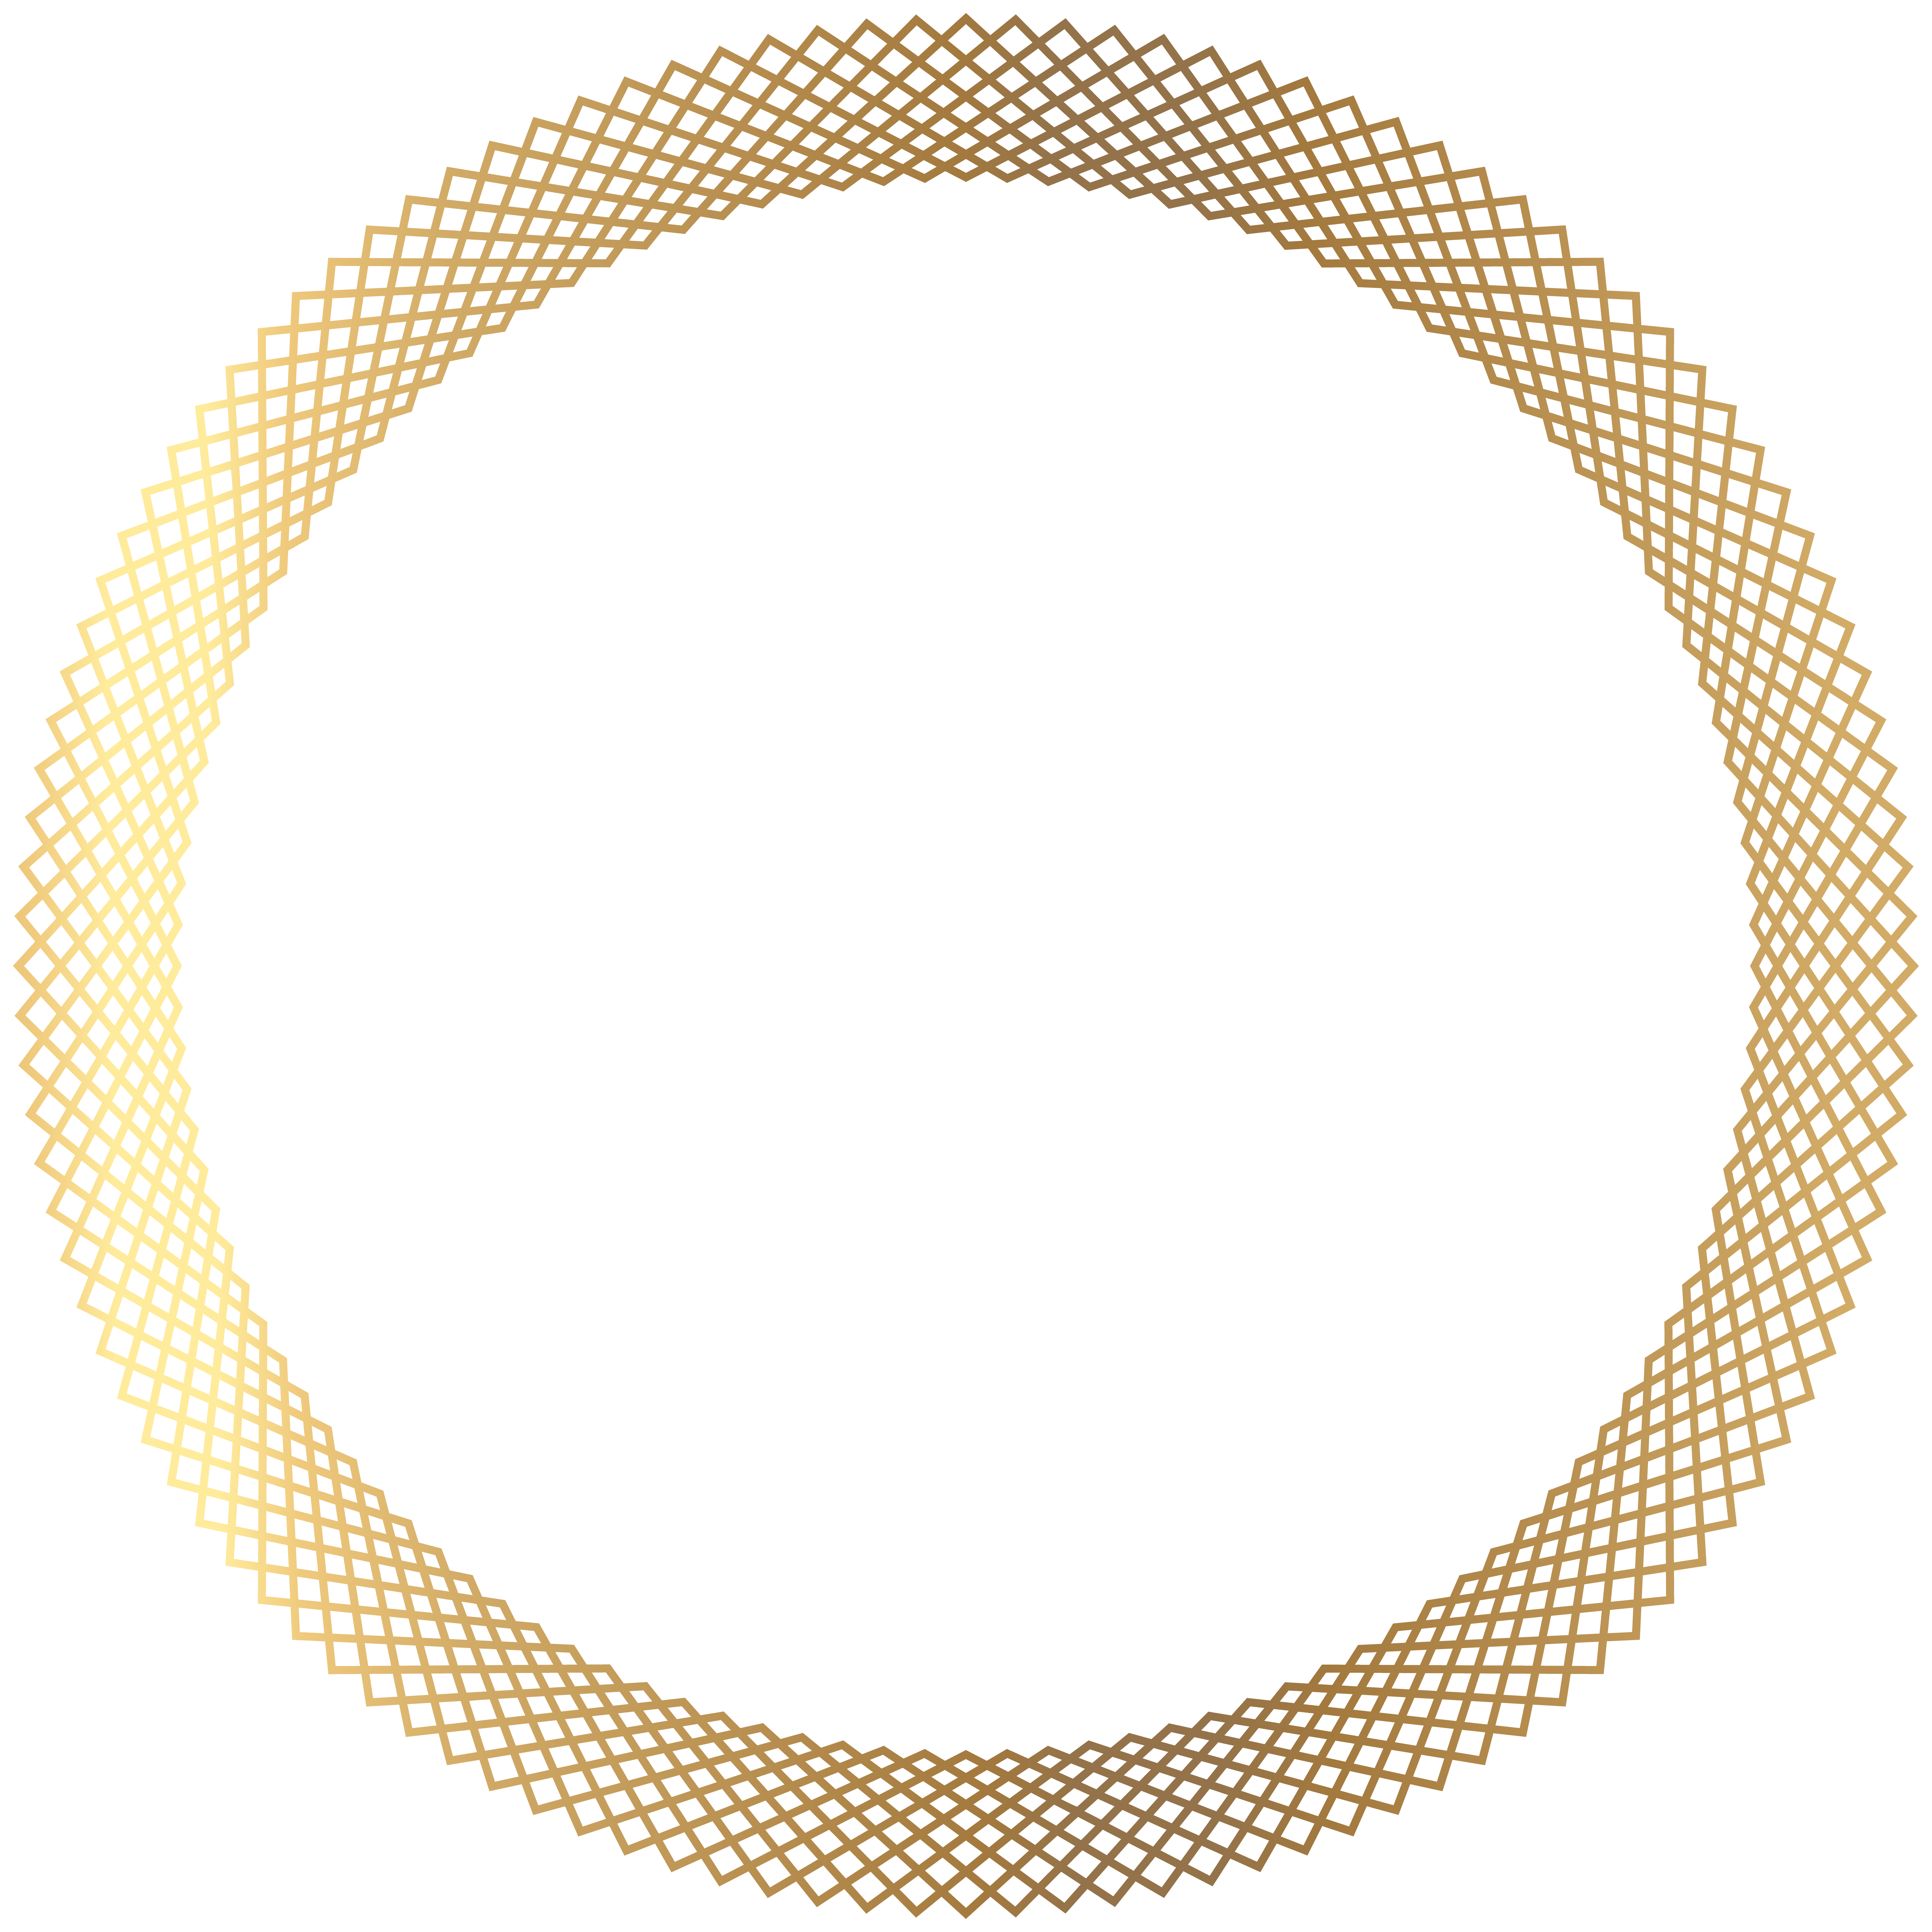 Image file formats Lossless compression Deco Gold Round Border PNG